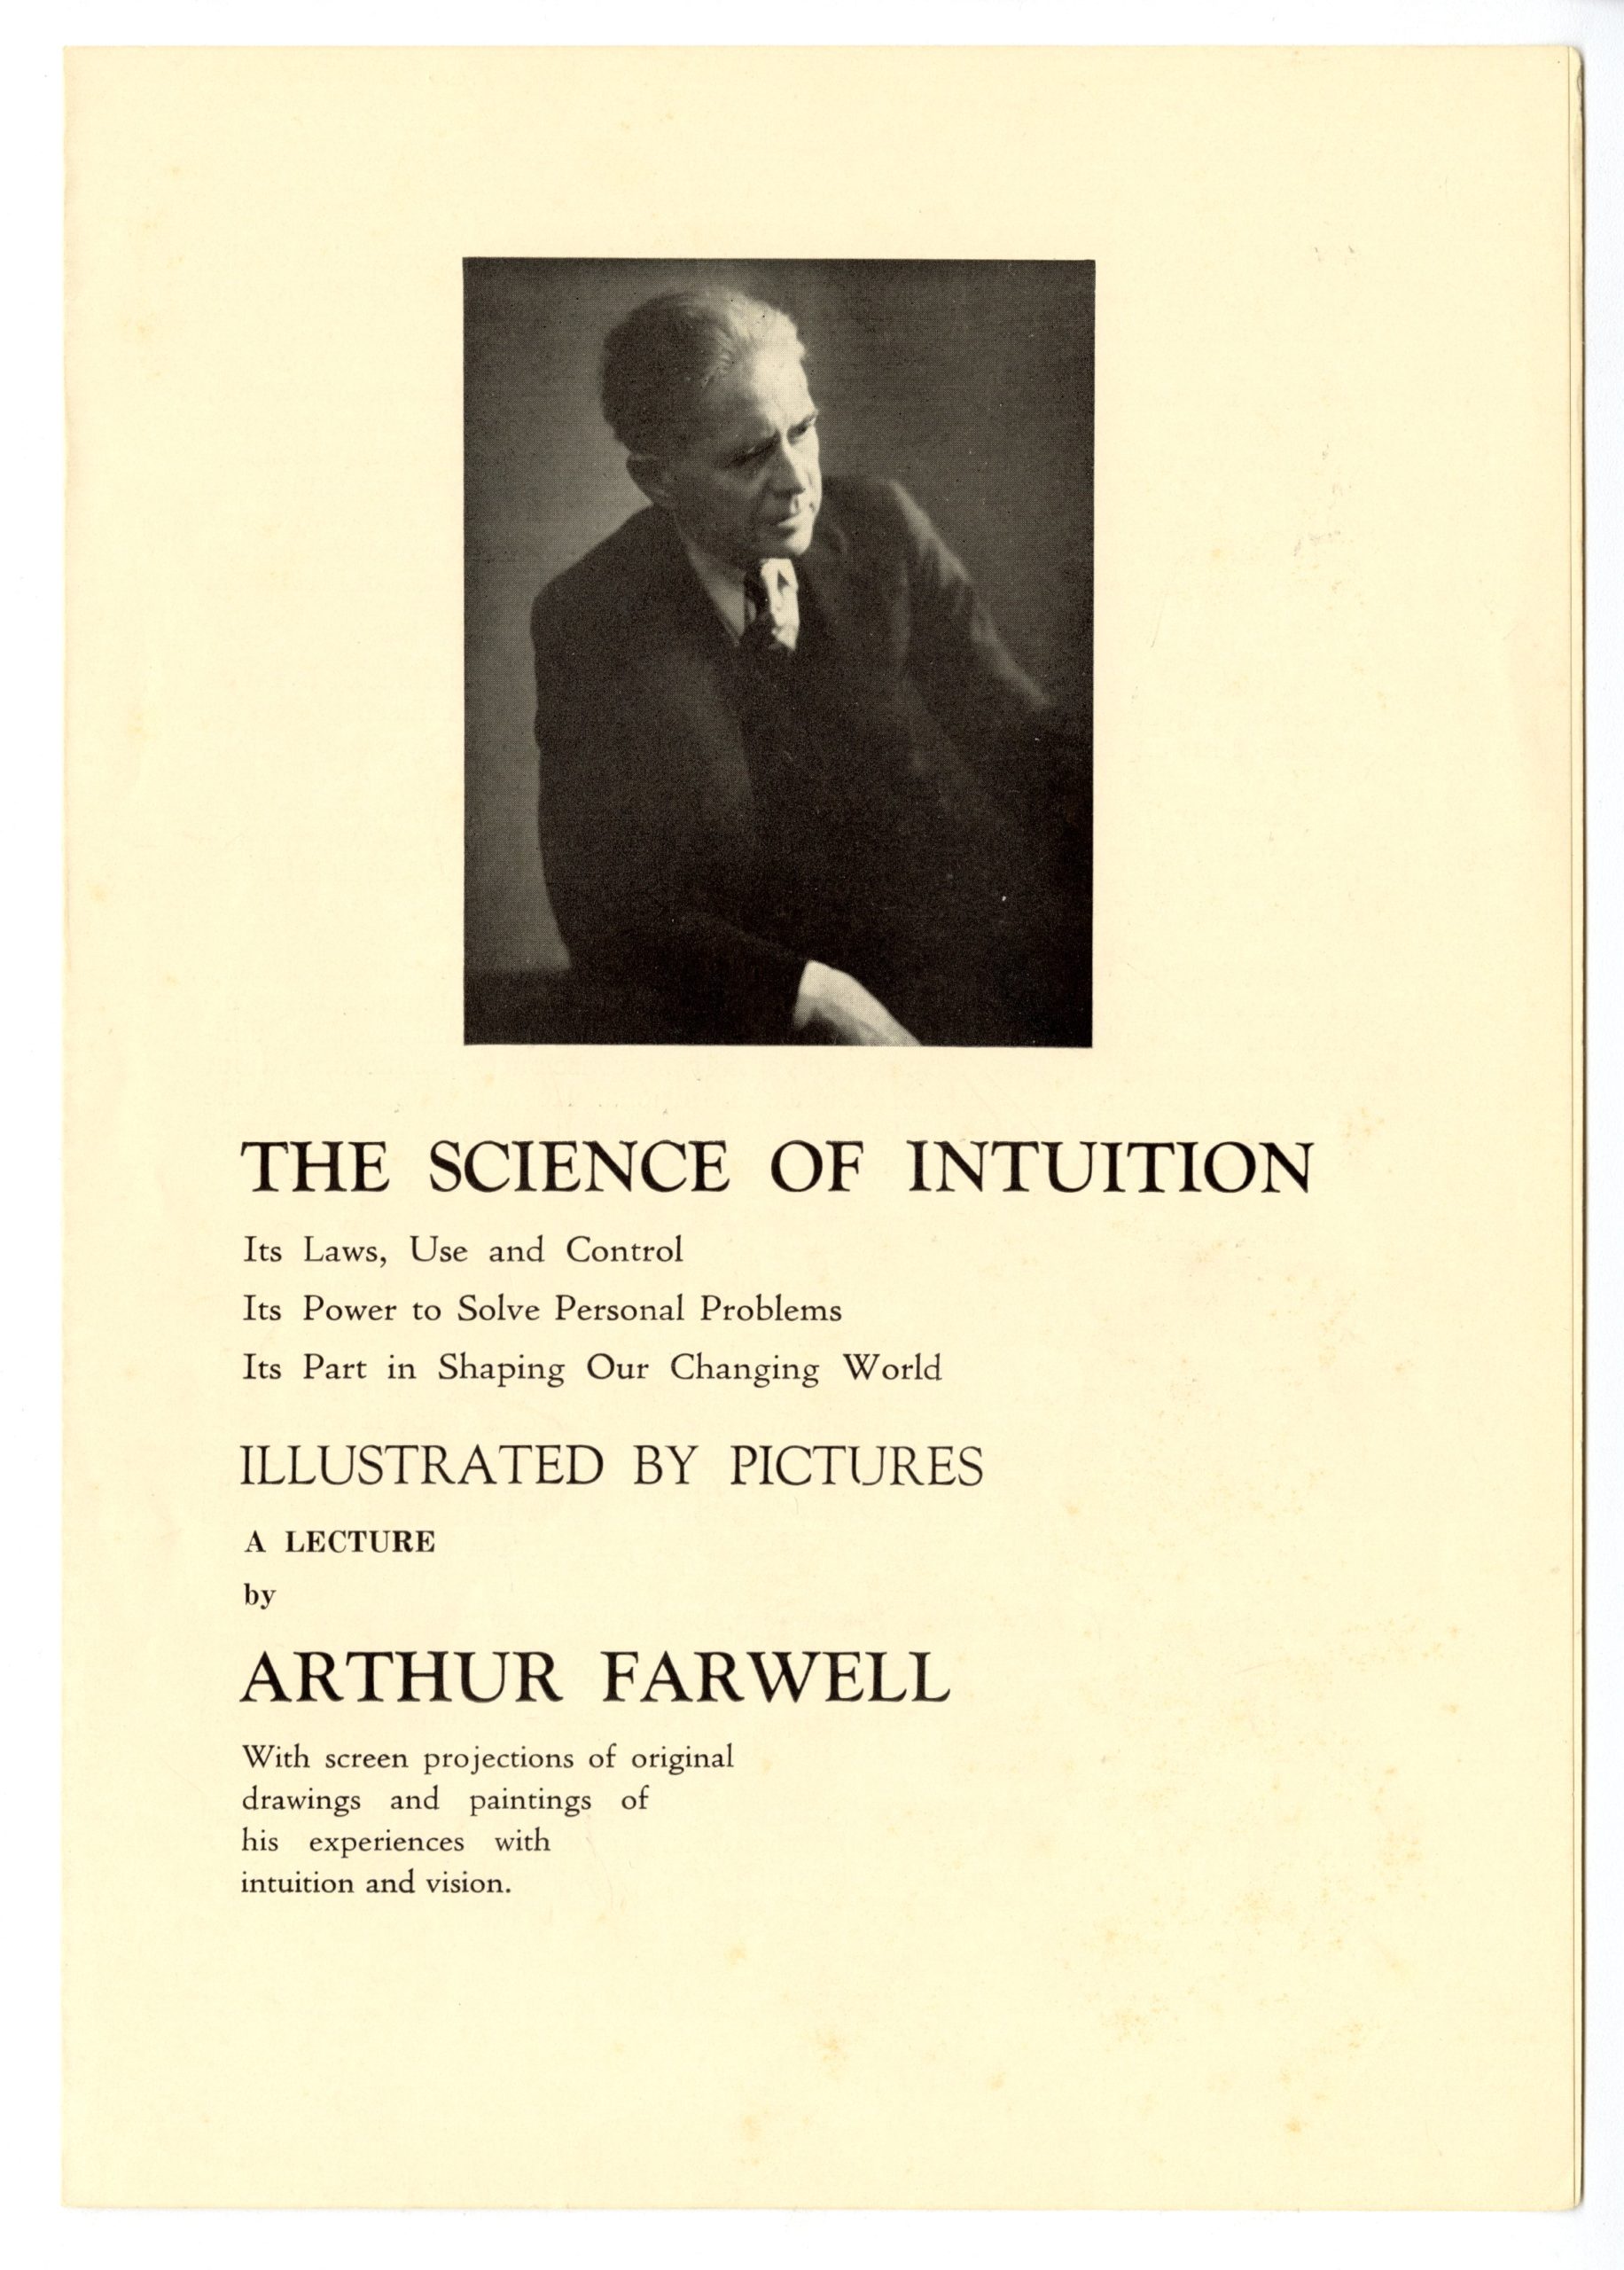 The Science of Intuition lecture program, front cover.